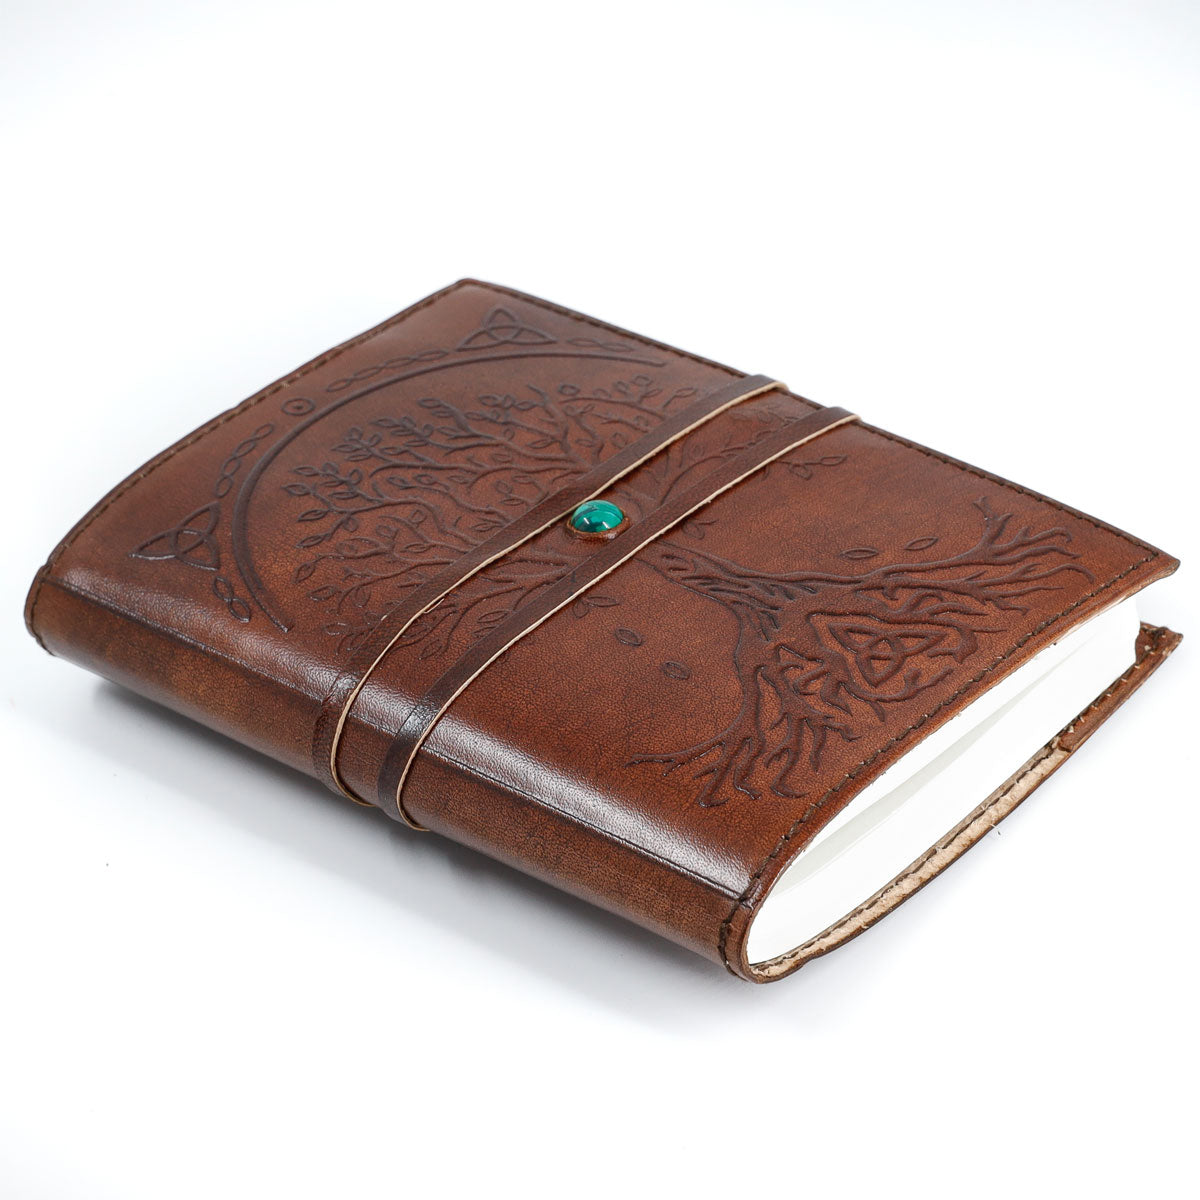 Leather Journal with Button Closure - Tree of Life